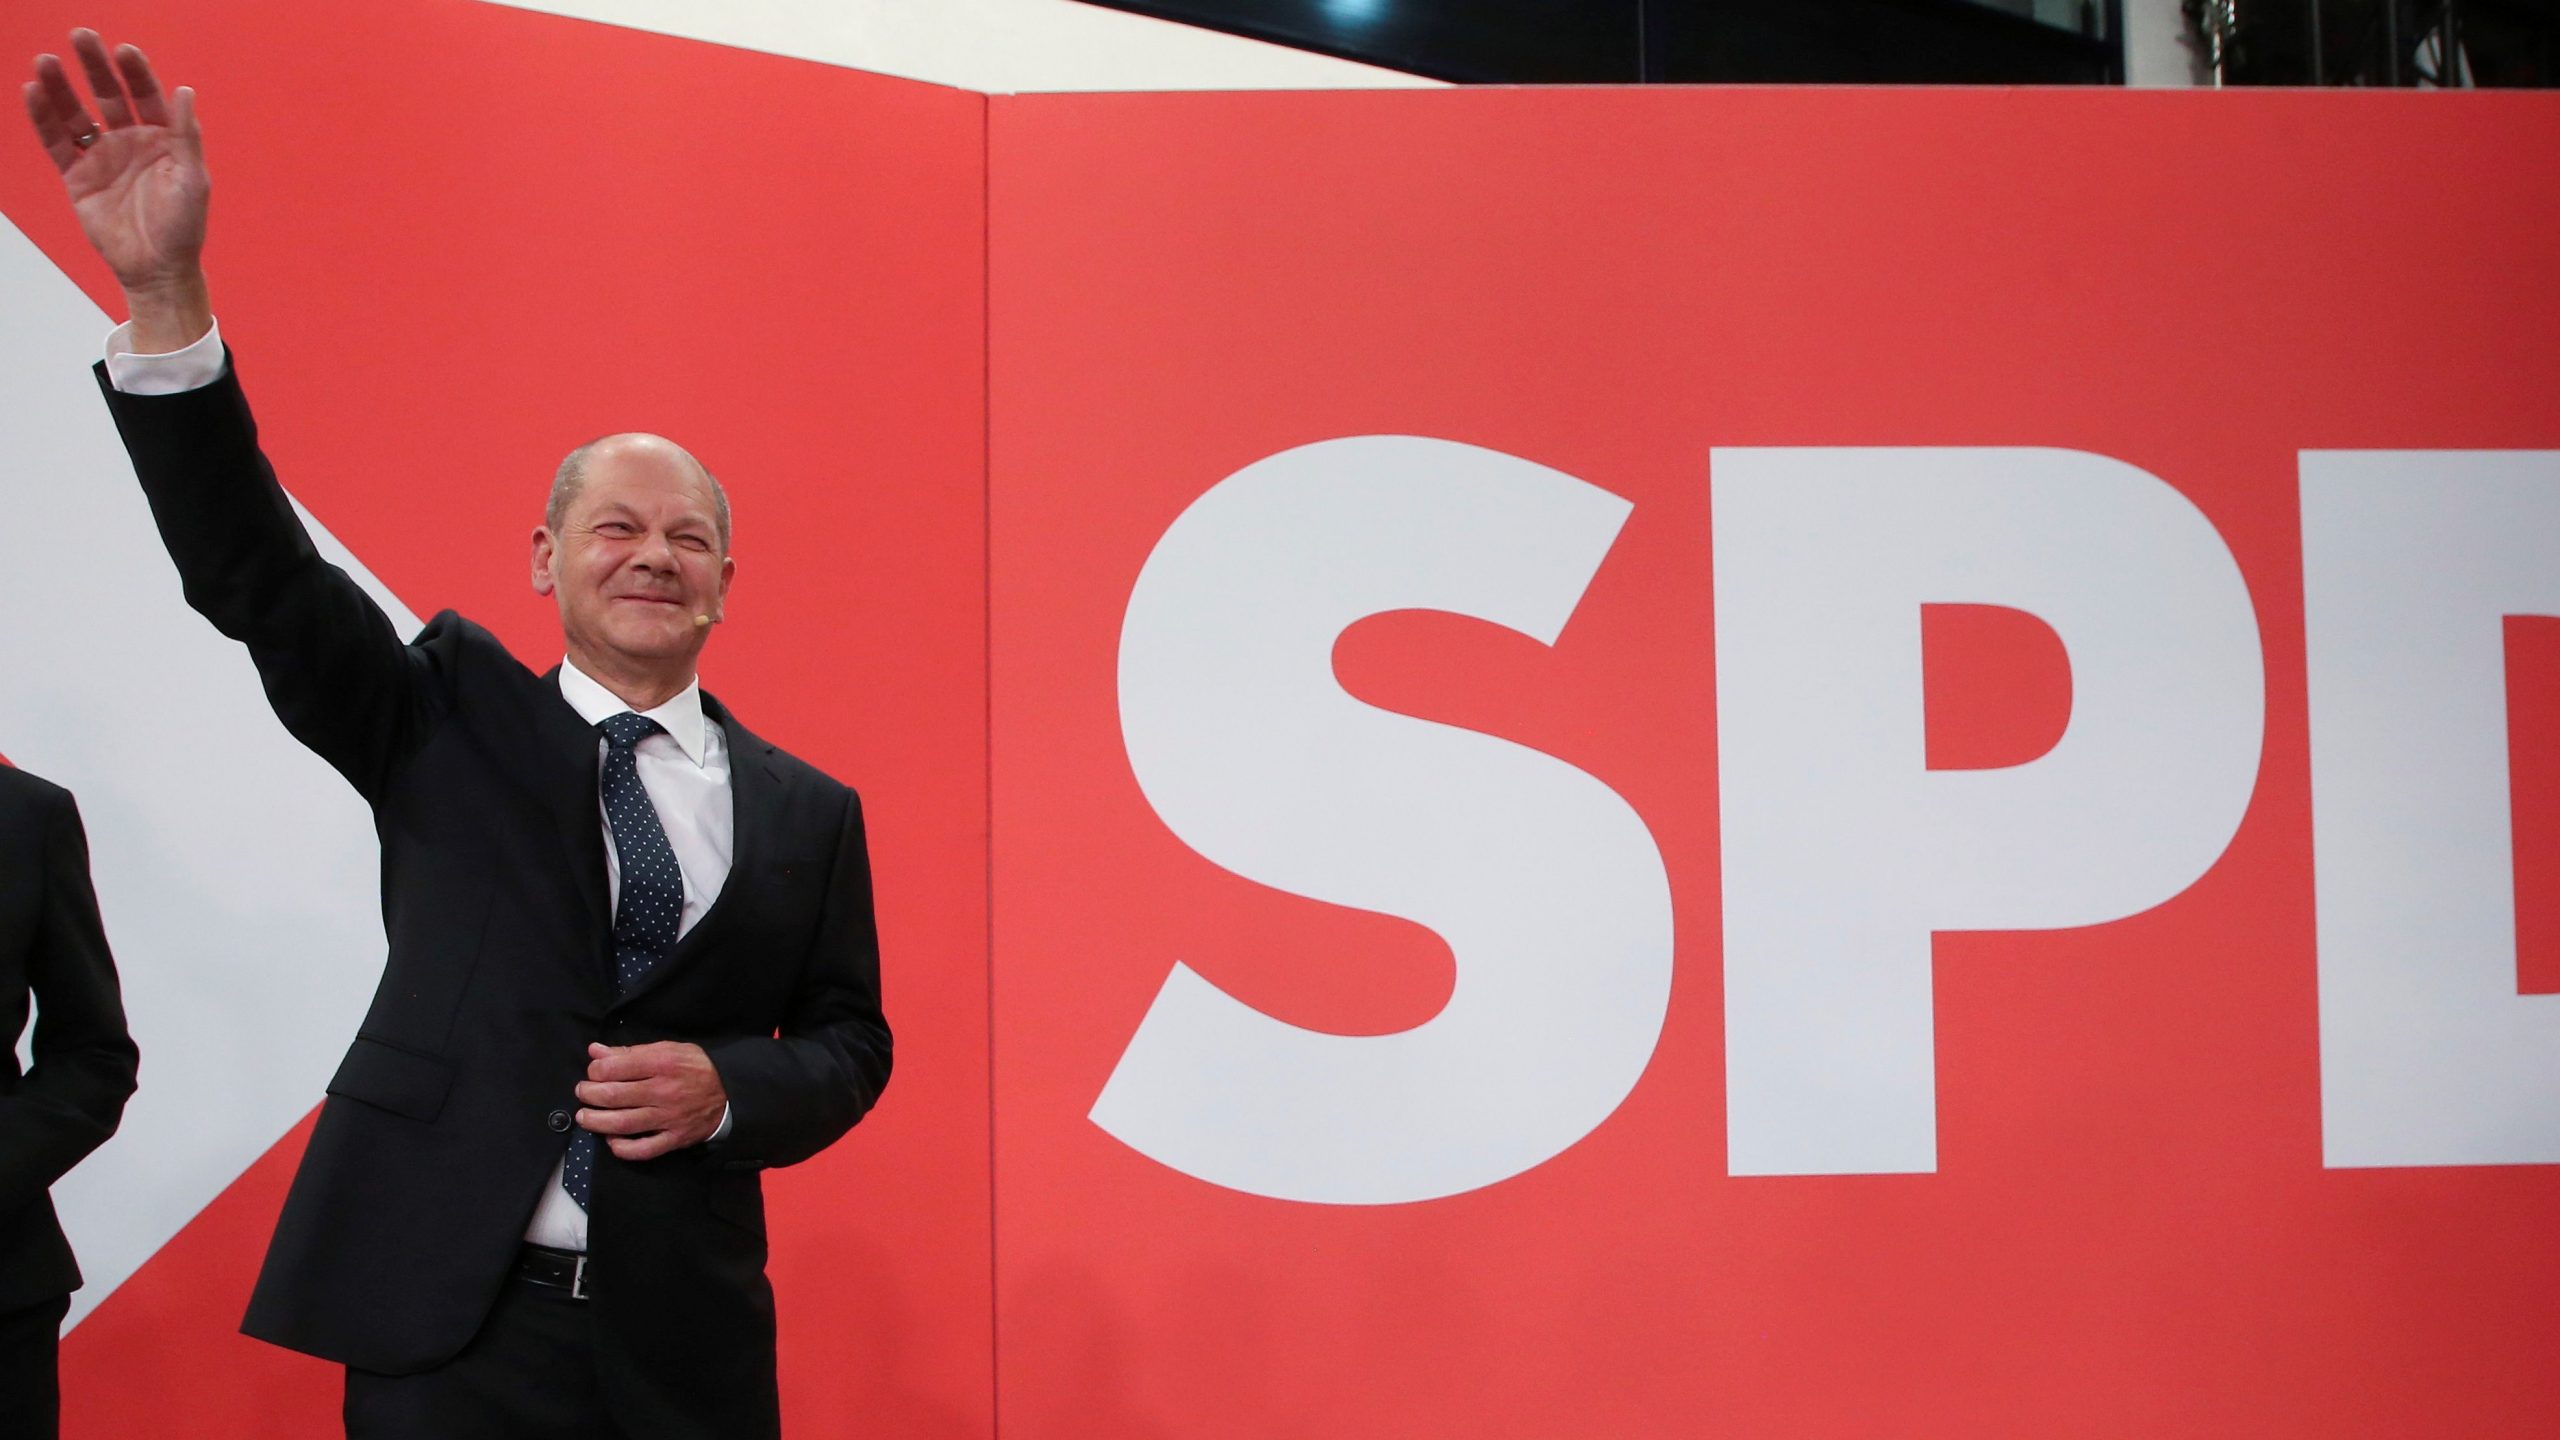 Press Roundup: More on the German Elections